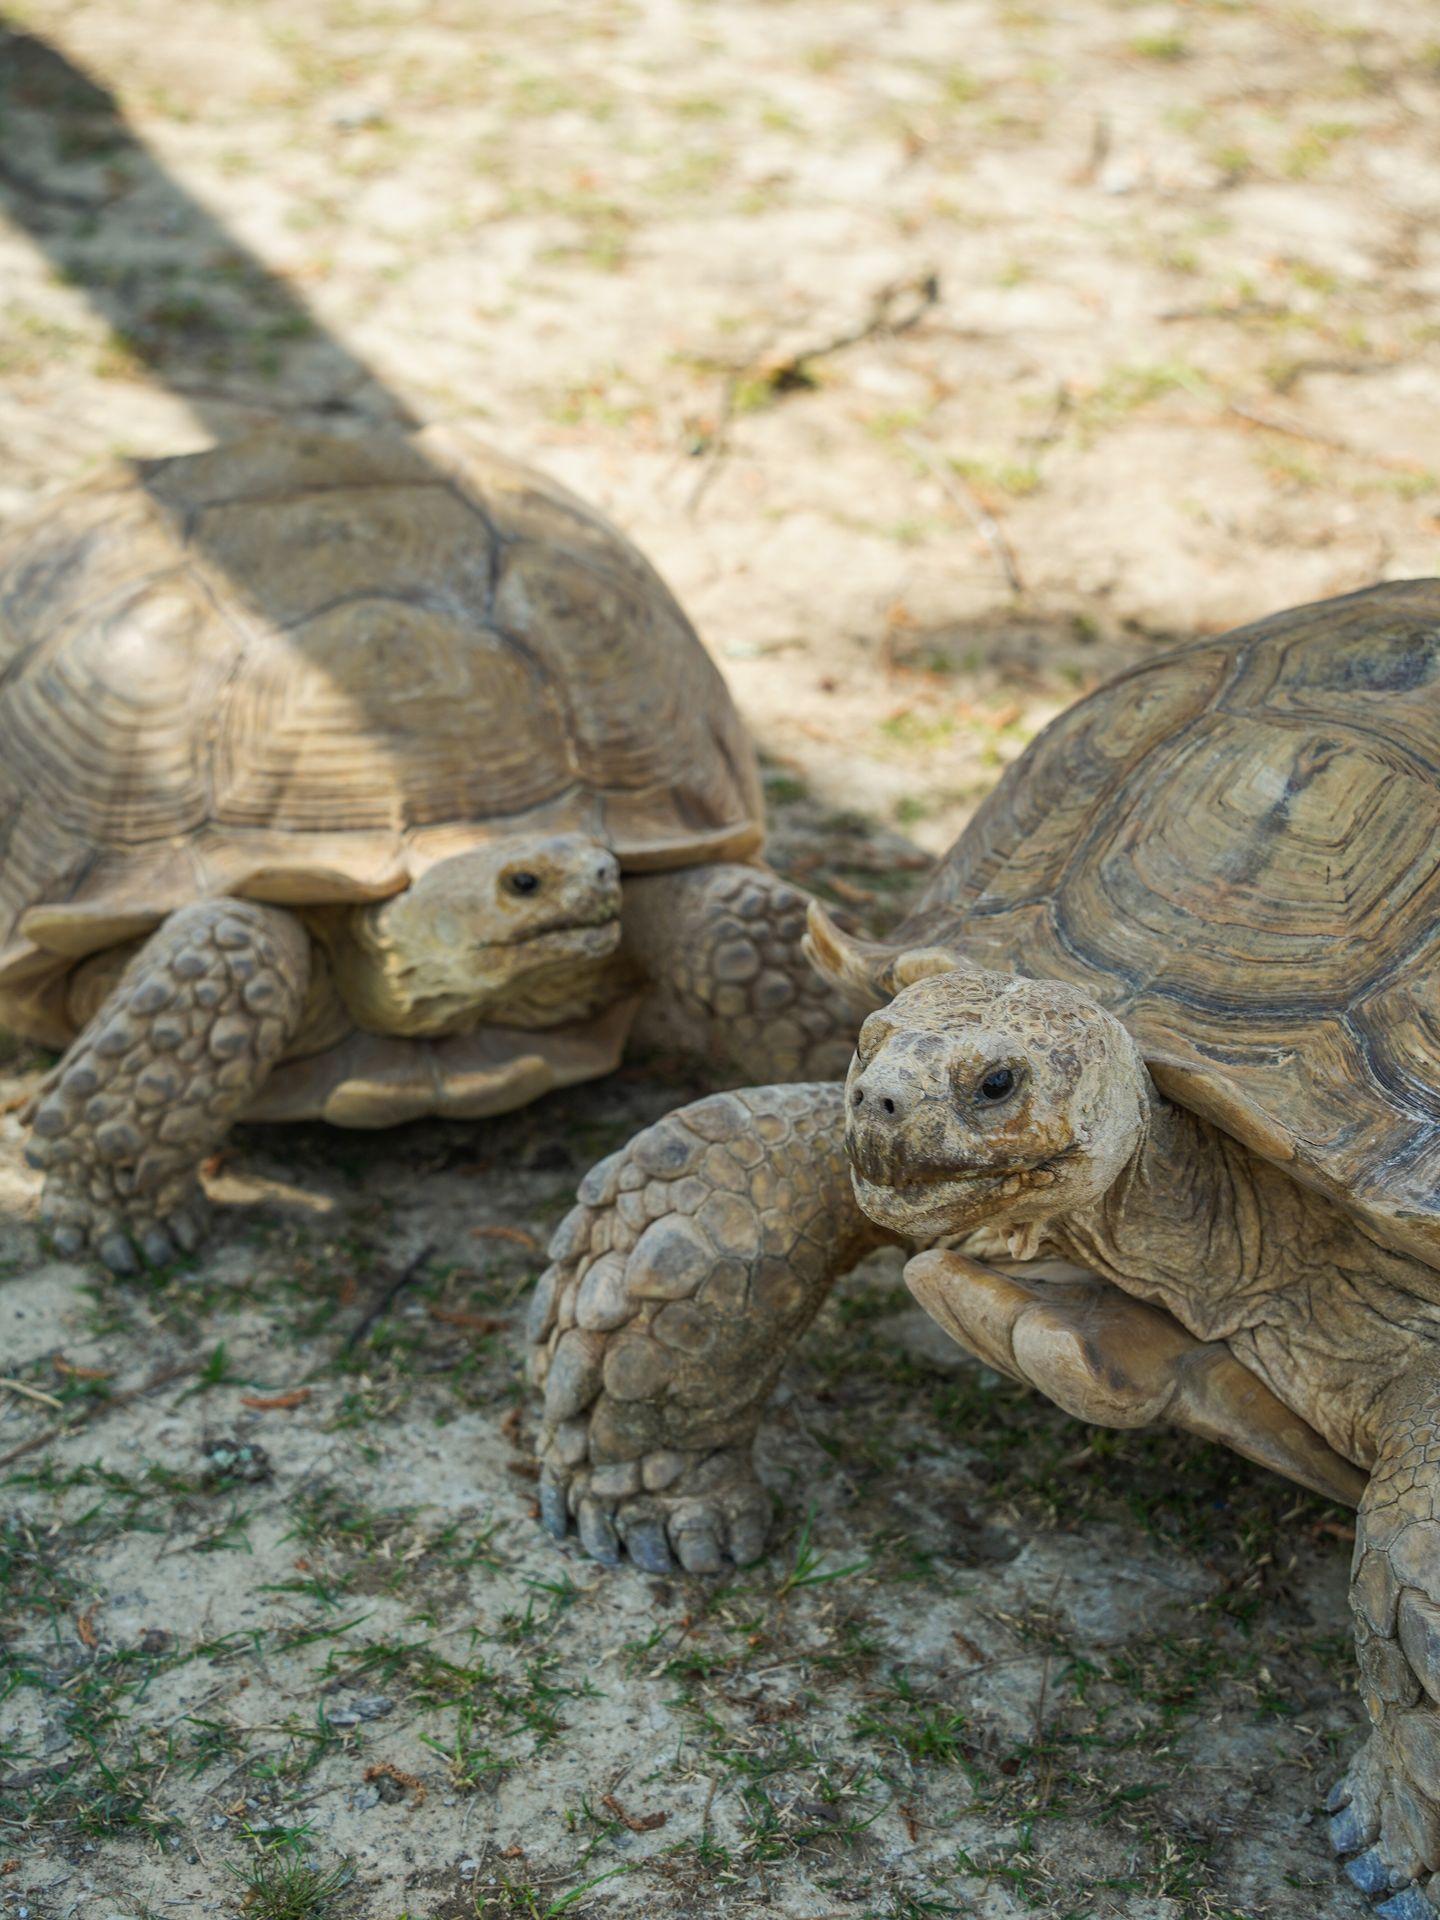 Two tortoises at Gator Country